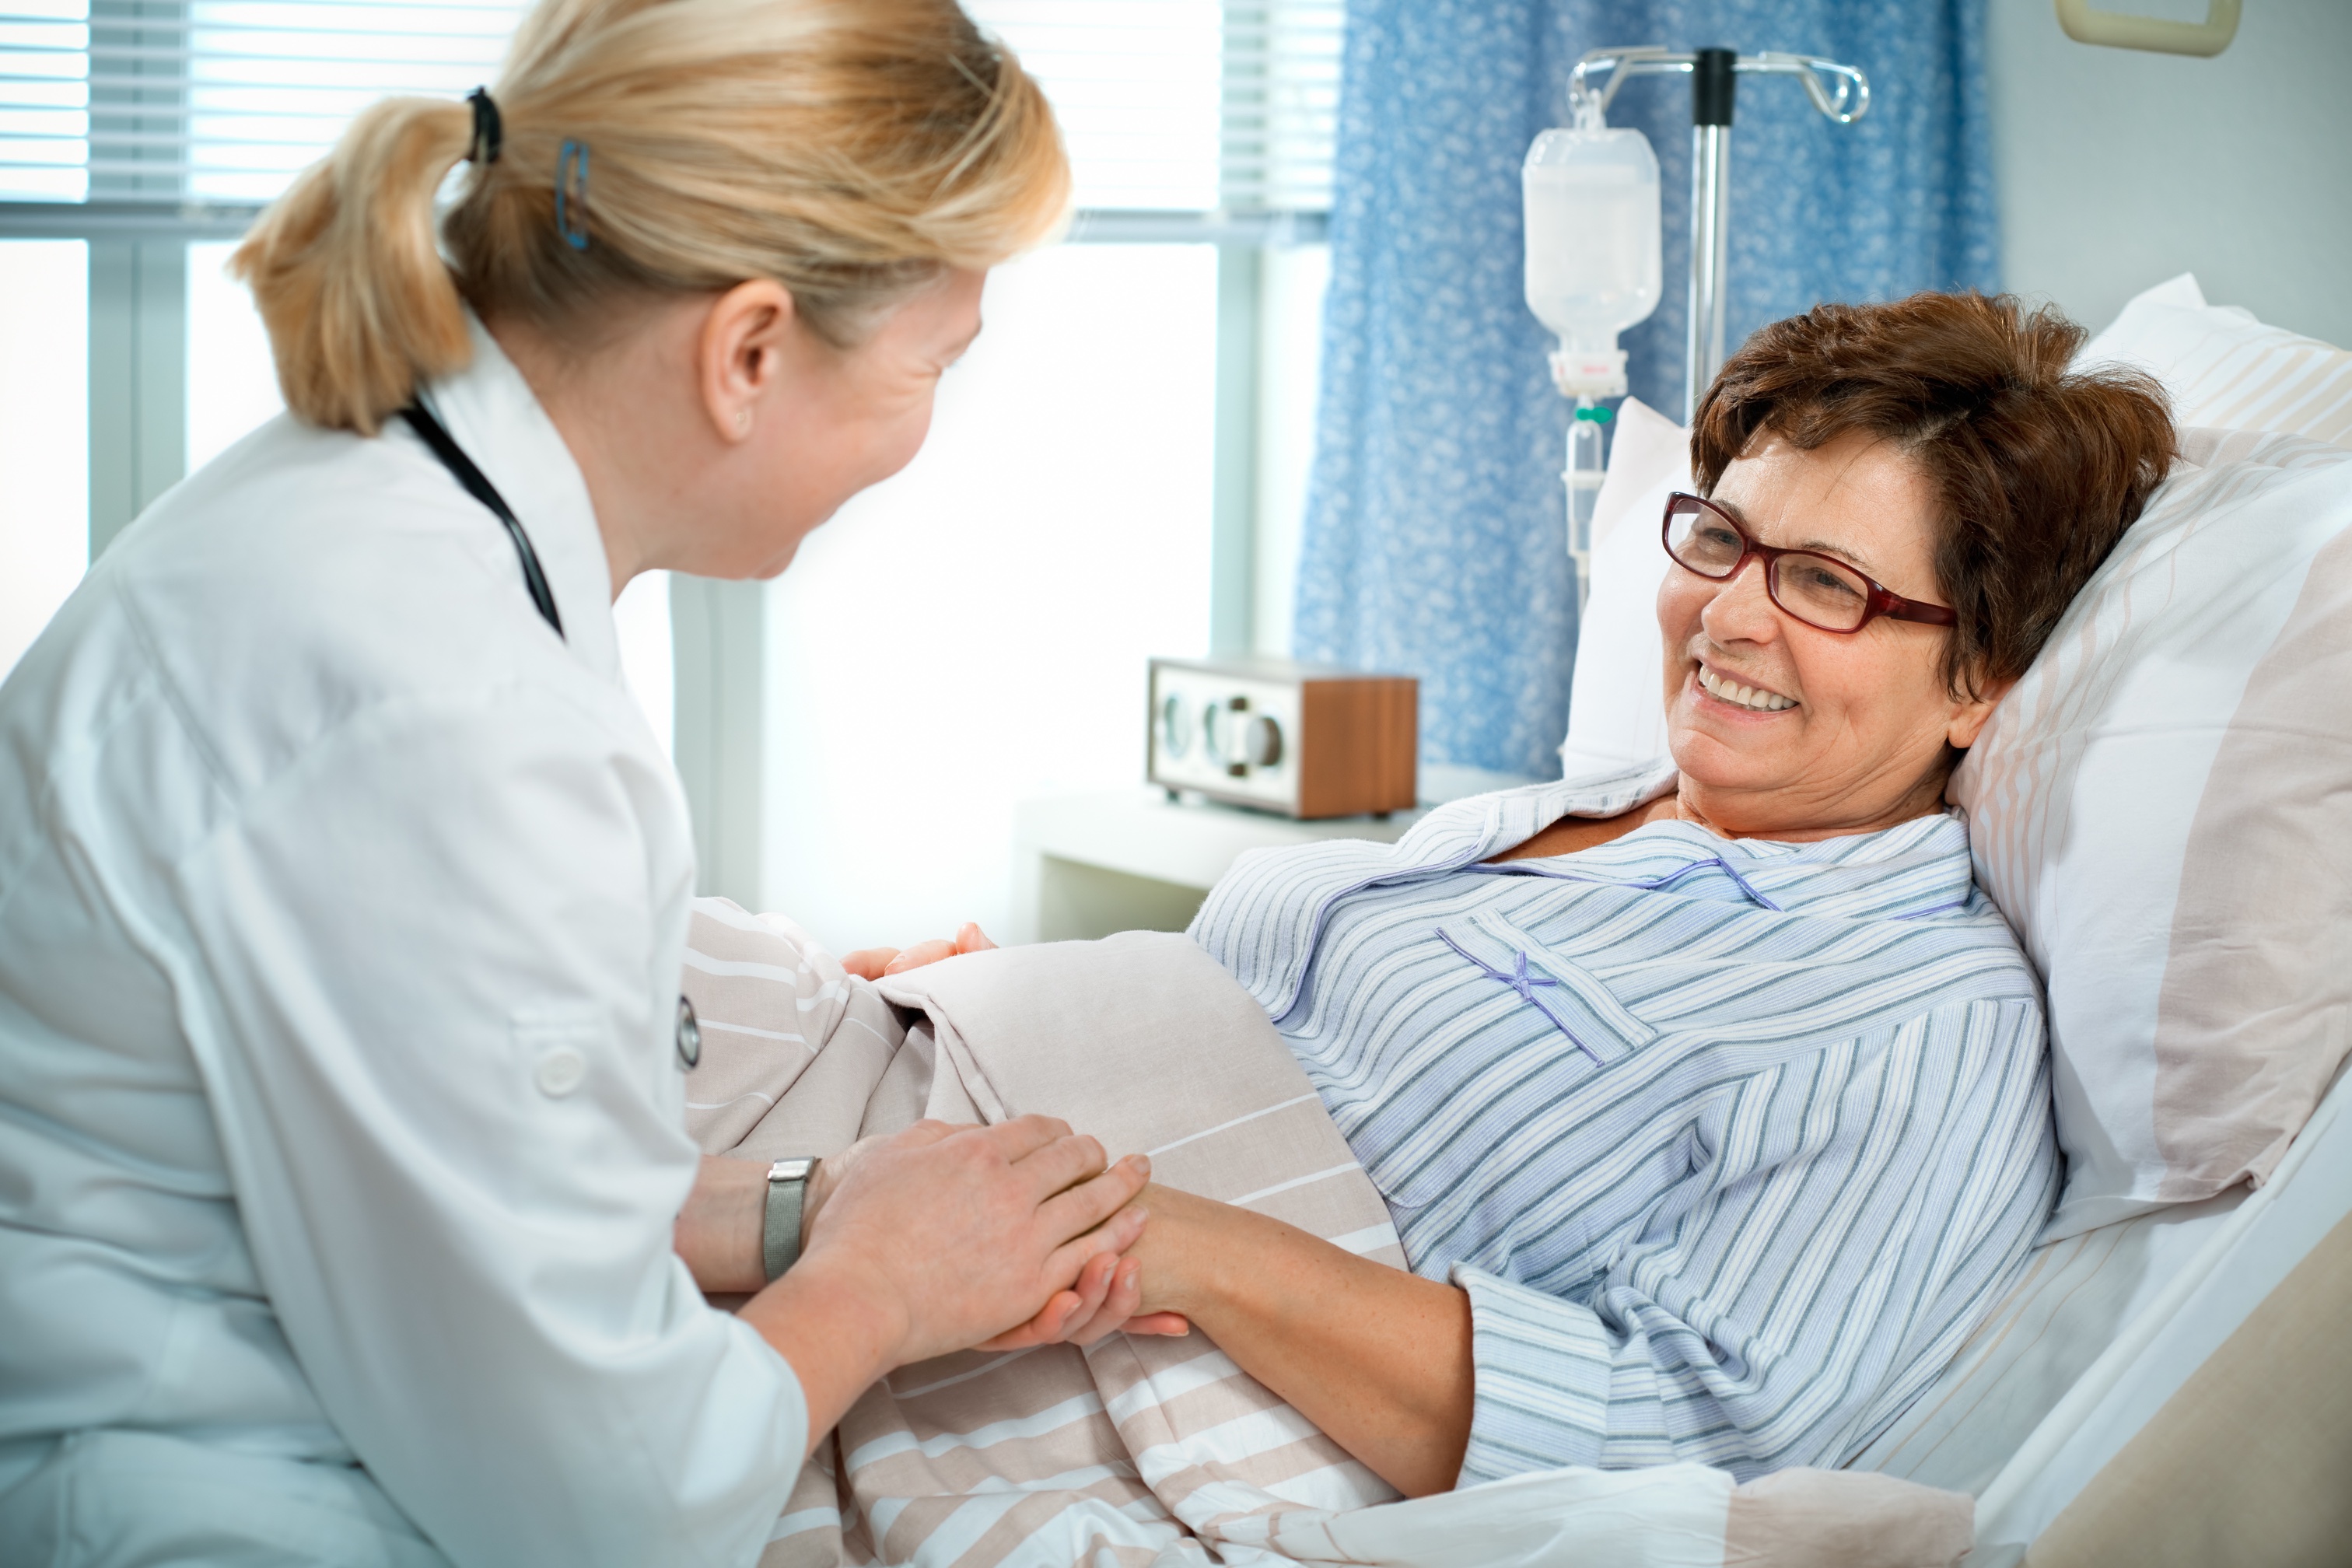 To Improve Patient Satisfaction, Ask More Questions